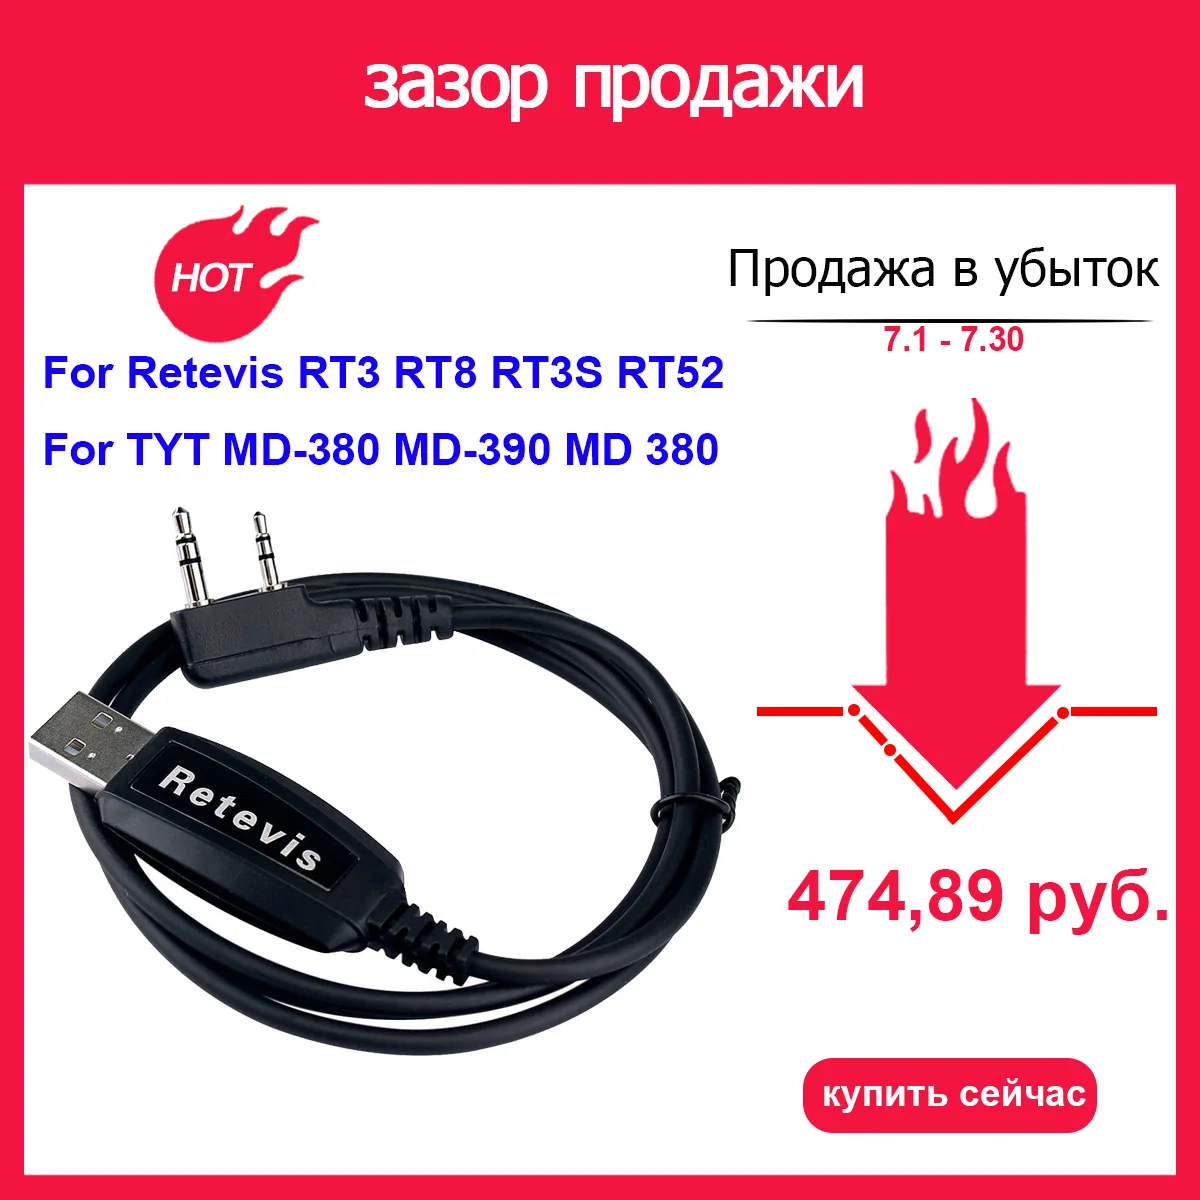 

Special RETEVIS USB Programming Cable For Retevis RT3 RT8 RT3S RT52 For TYT MD-380 MD-390 MD 380 DMR Radio Walkie Talkie J9110P